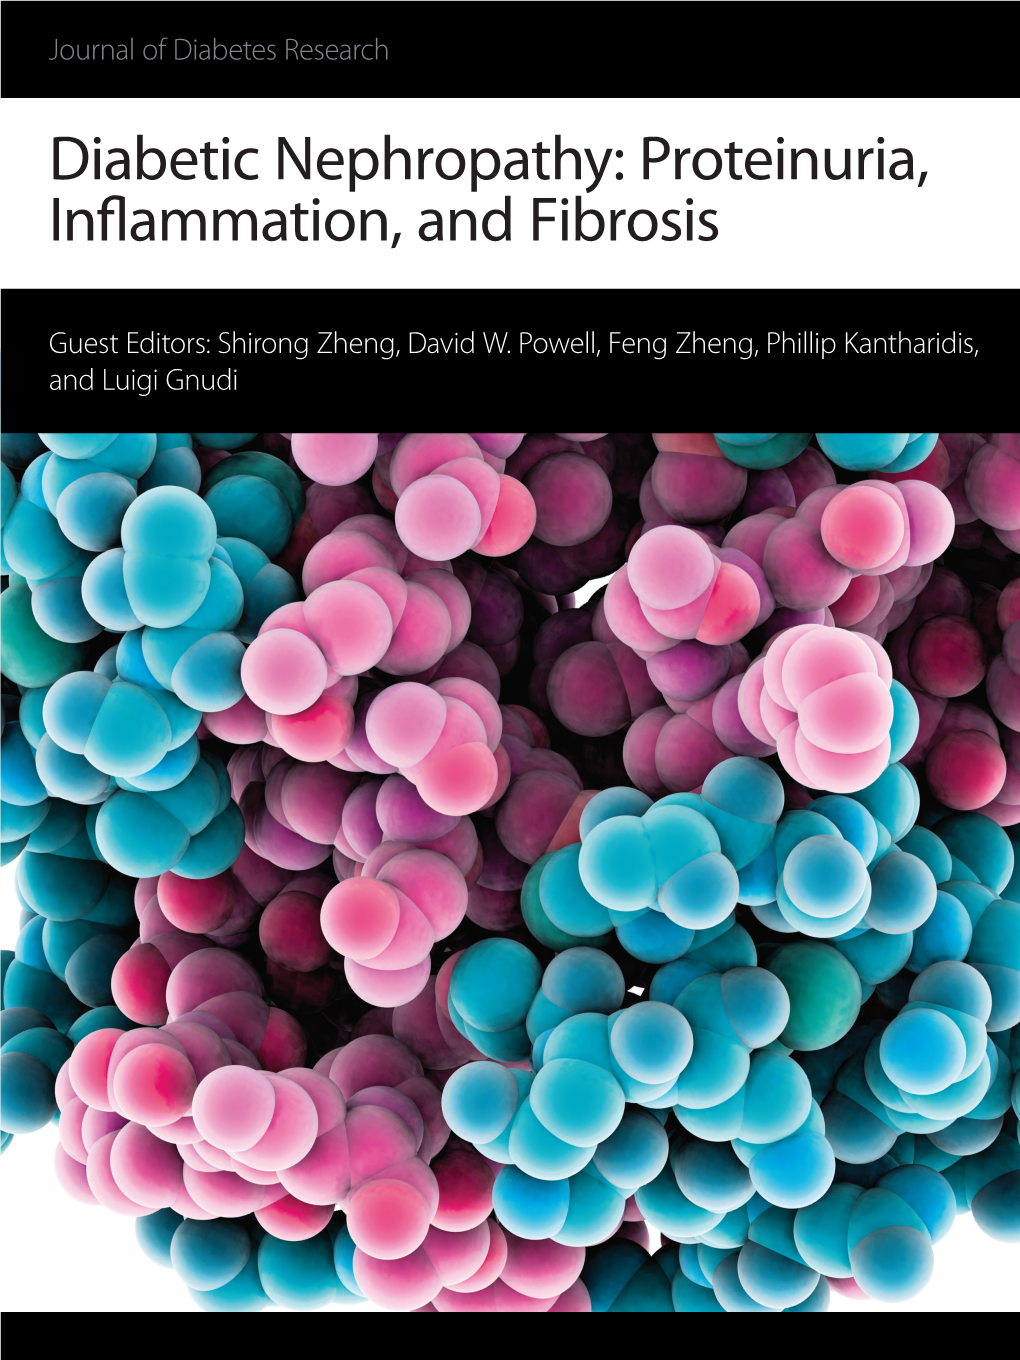 Diabetic Nephropathy: Proteinuria, Inflammation, and Fibrosis